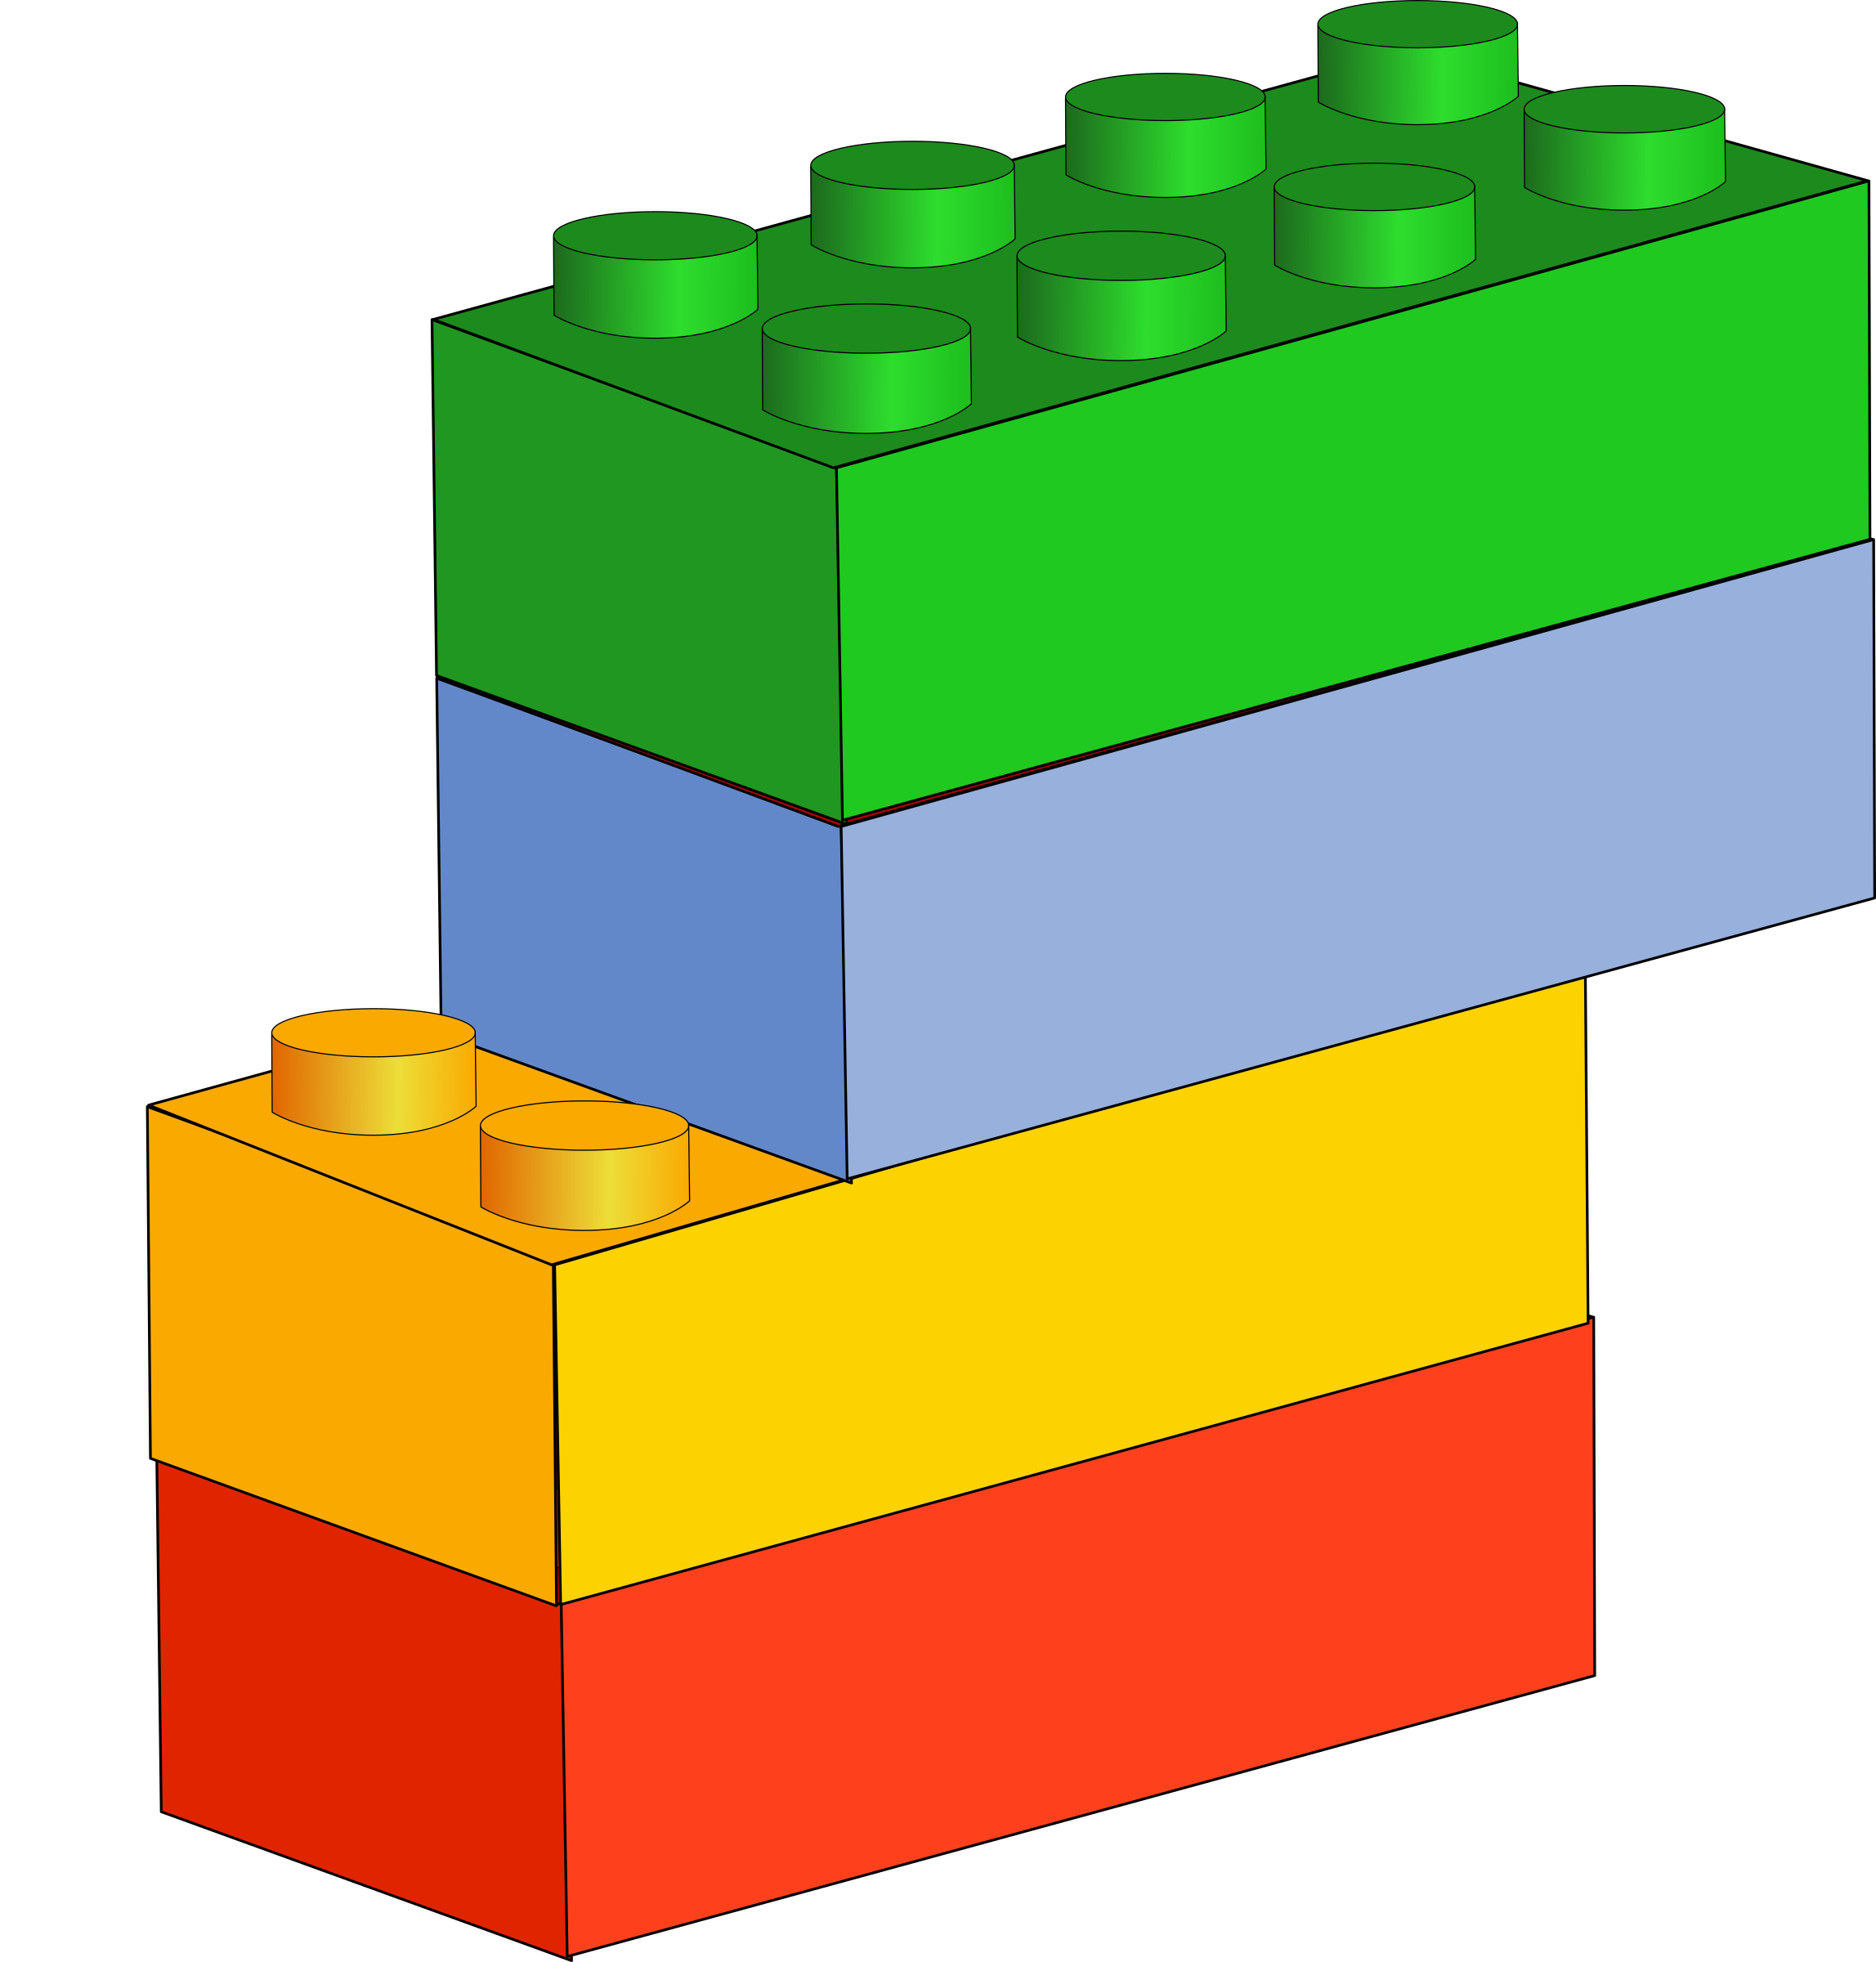 Lego clipart images